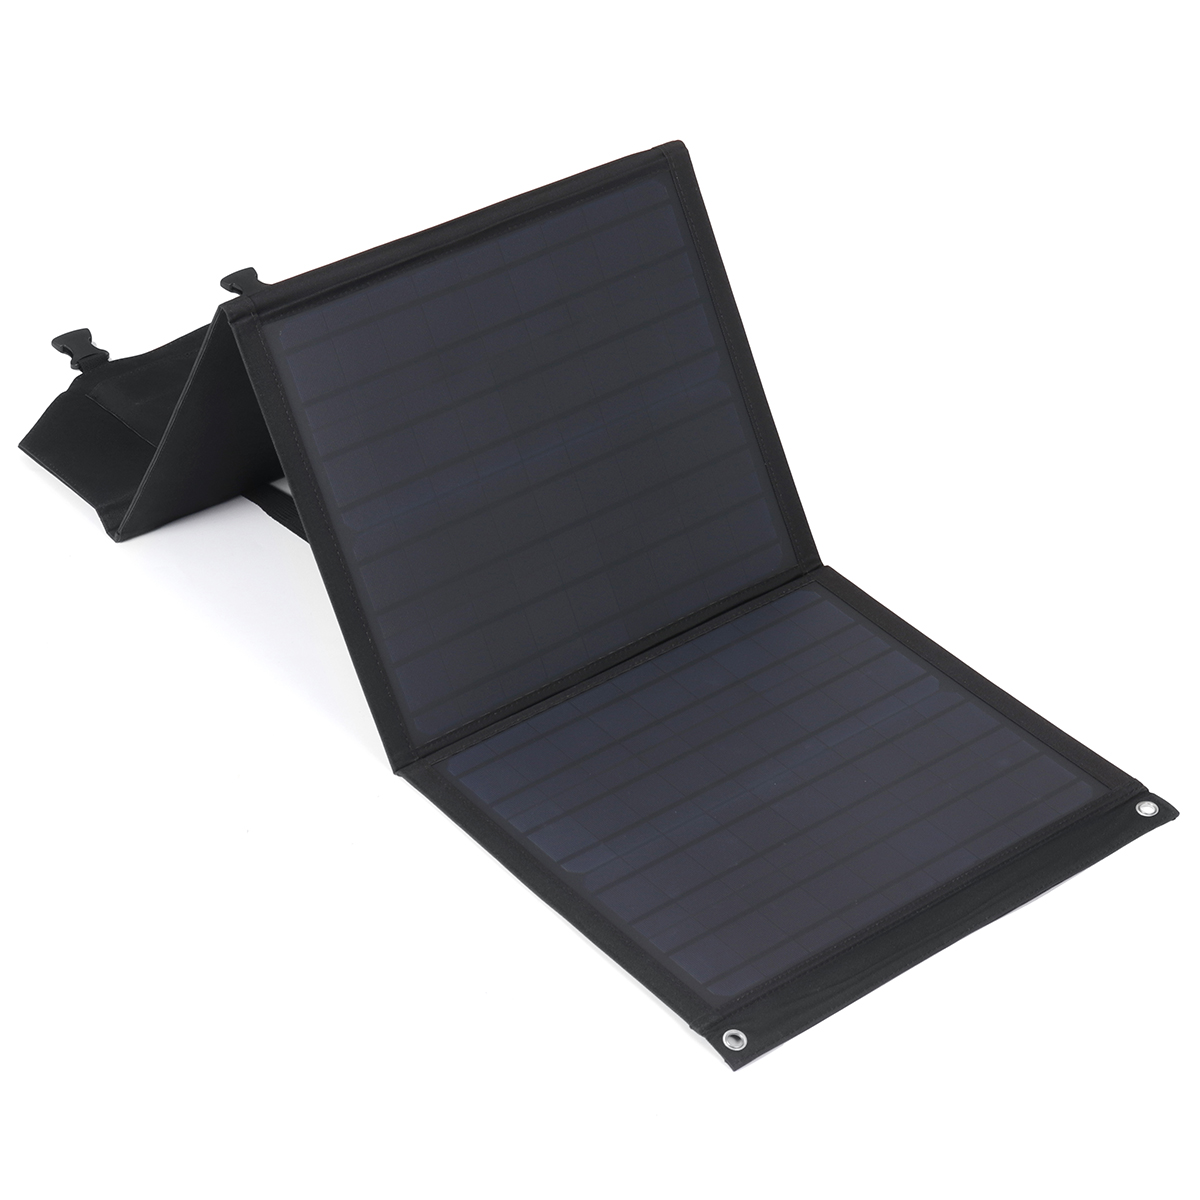 60W-USB-Solar-Panel-Folding-Monocrystalline-PET-Power-Charger--for-Phone-RV-Car-MP3-PAD-Charger-Outd-1905385-15